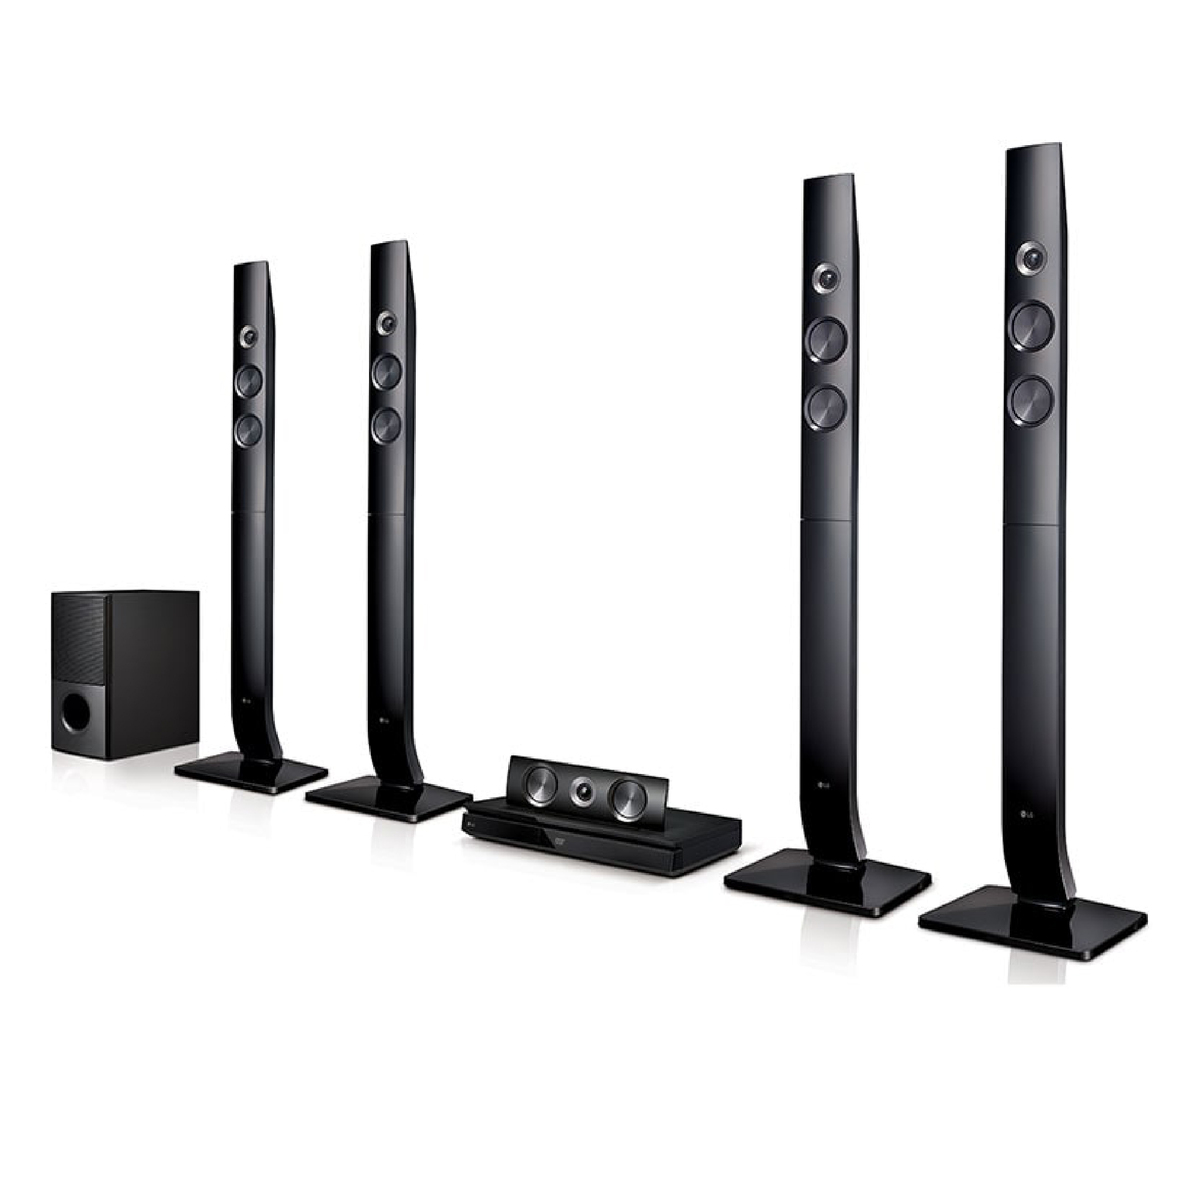 Buy LG Home Theater 5.1 Chanel LHD756 Online at Best Price | Home Theatre | Lulu KSA in Saudi Arabia